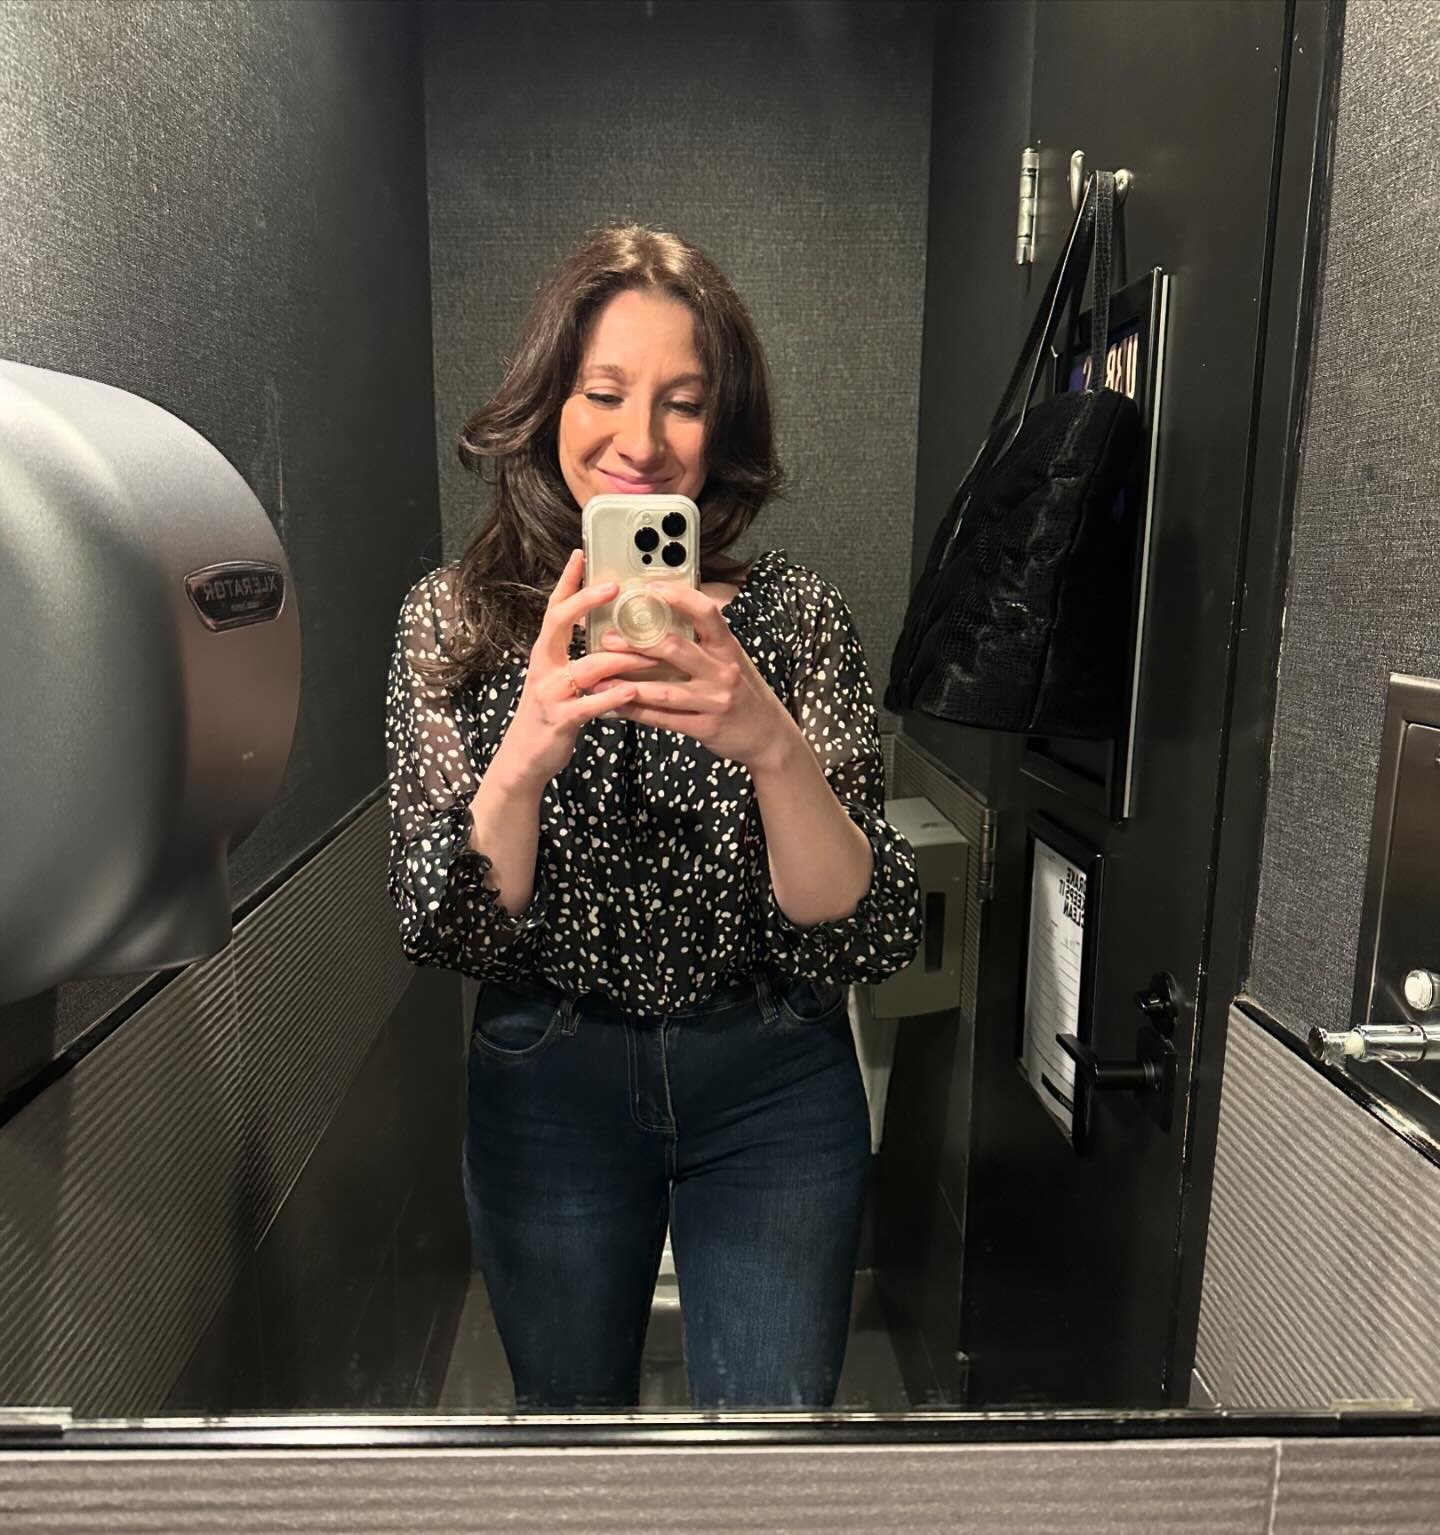 Bathroom selfie reflections&hellip; 📸

This weekend I revisited my old hood - my old stomping grounds when I used to be a big party girl. Then feels came up. Like big feels I wasn&rsquo;t expecting. Even my husband was like &ldquo;you ok?!&rdquo;. 
